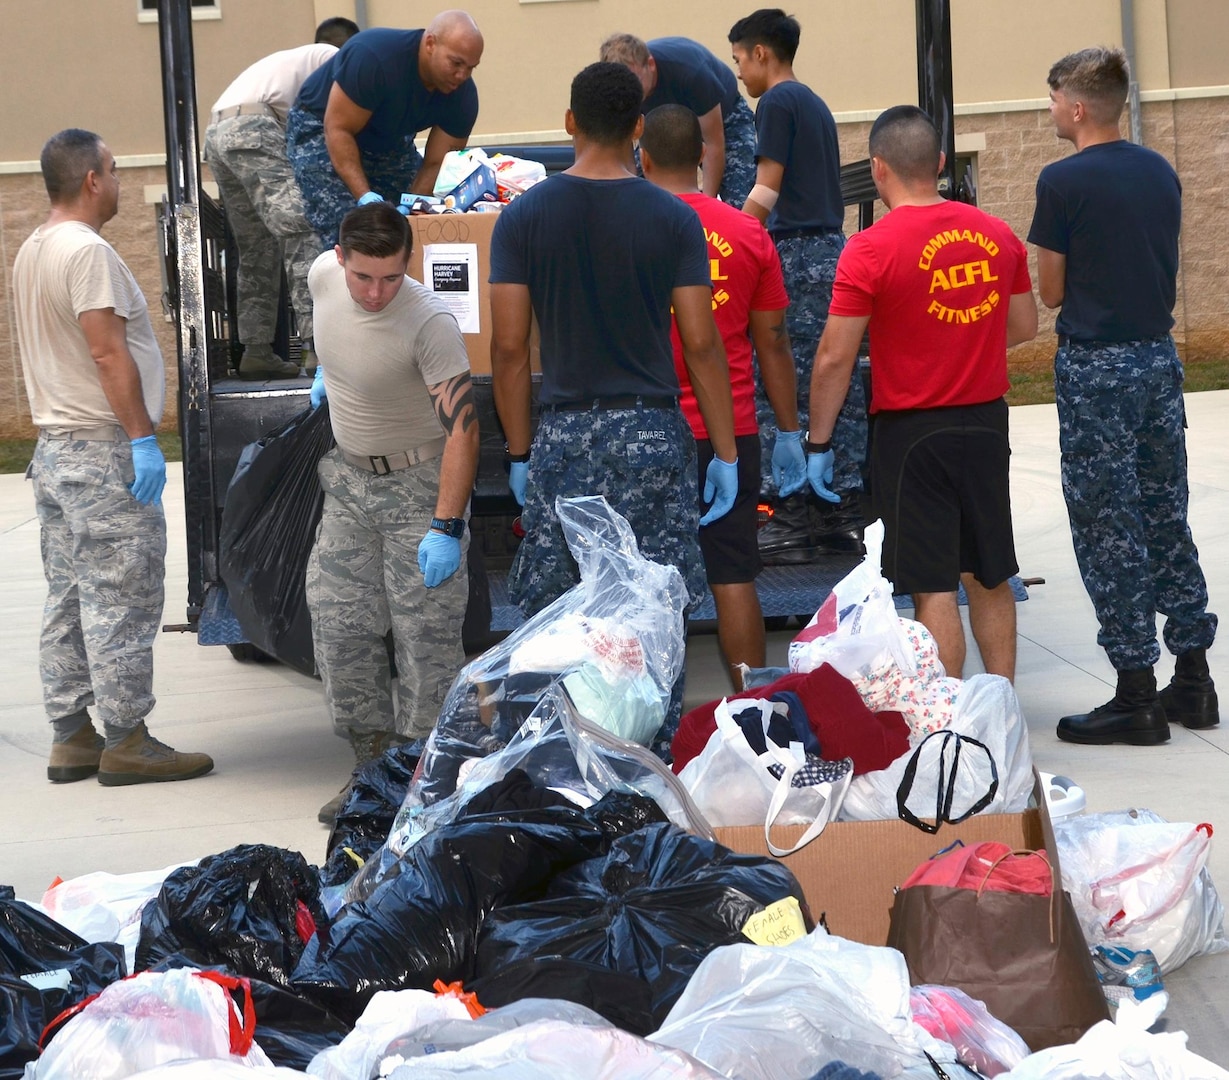 Air Force,  Navy and civilian volunteers from the Medical Education and Training Campus (METC), 59th Training Group, and Navy Medicine Training Support Center (NMTSC) unload donations collected for victims of Hurricane Harvey to the sorting area September 19. In all, the team collected and donated 450 pounds of food to the San Antonio Food Bank, $3,300 in donated diapers to the Diaper Bank, $19,000 in clothing and incidentals to the Salvation Army, and numerous donations to the American Society for the Prevention of Cruelty to Animals and homeless shelters.